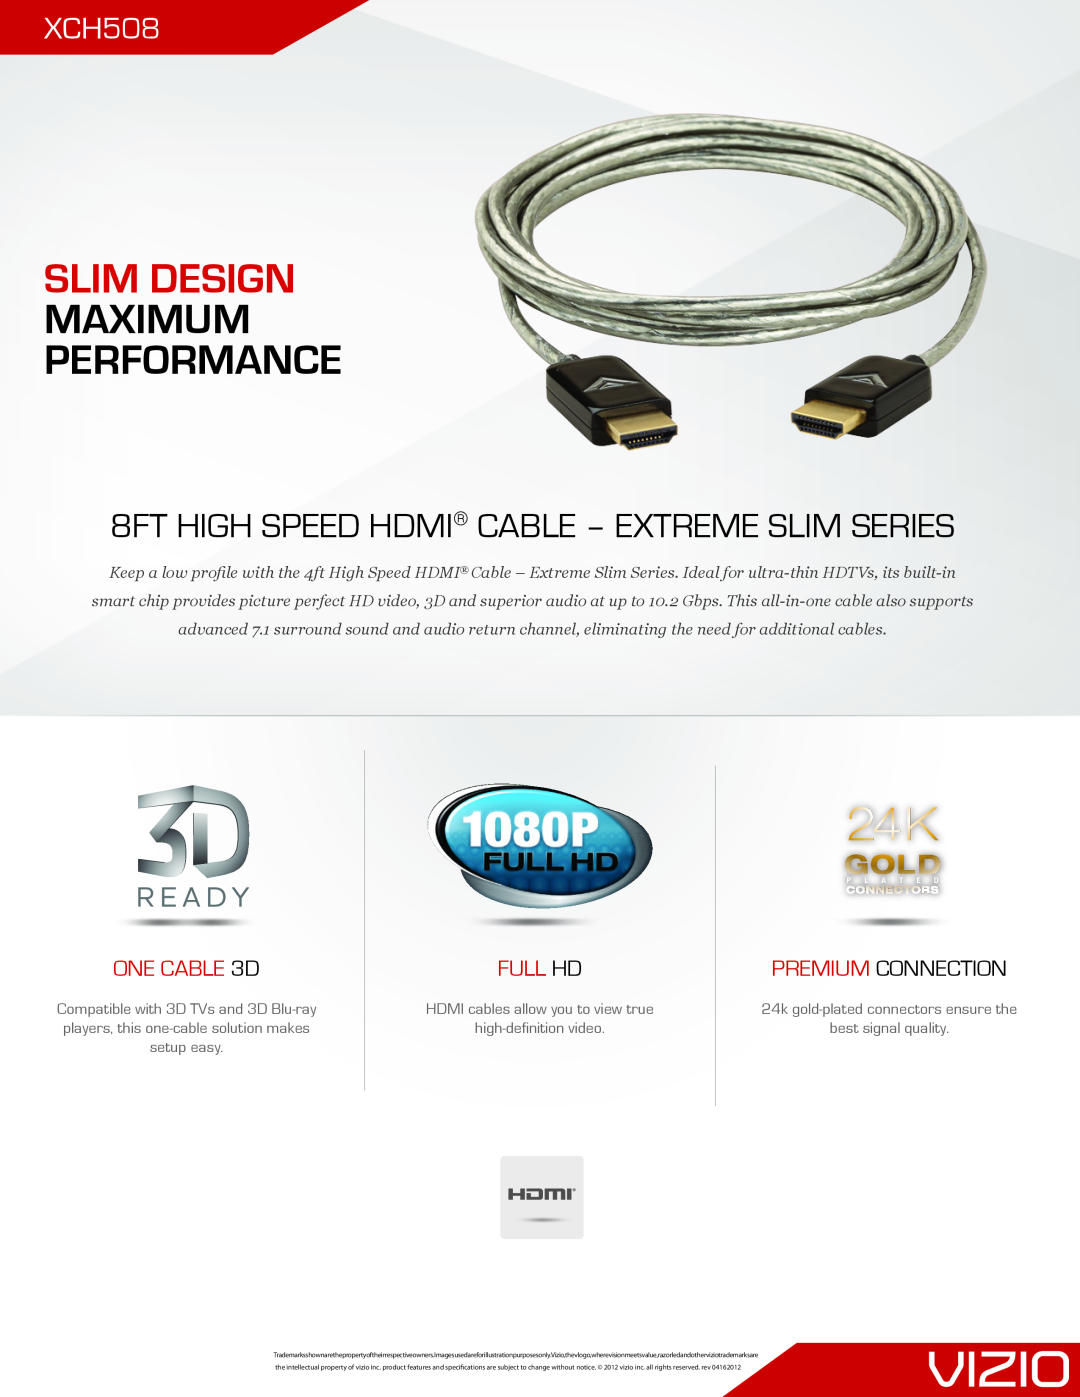 Vizio XCH508 manual Slim Design, Maximum Performance, 8FT HIGH SPEED HDMI CABLE - EXTREME SLIM SERIES, ONE CABLE 3D 